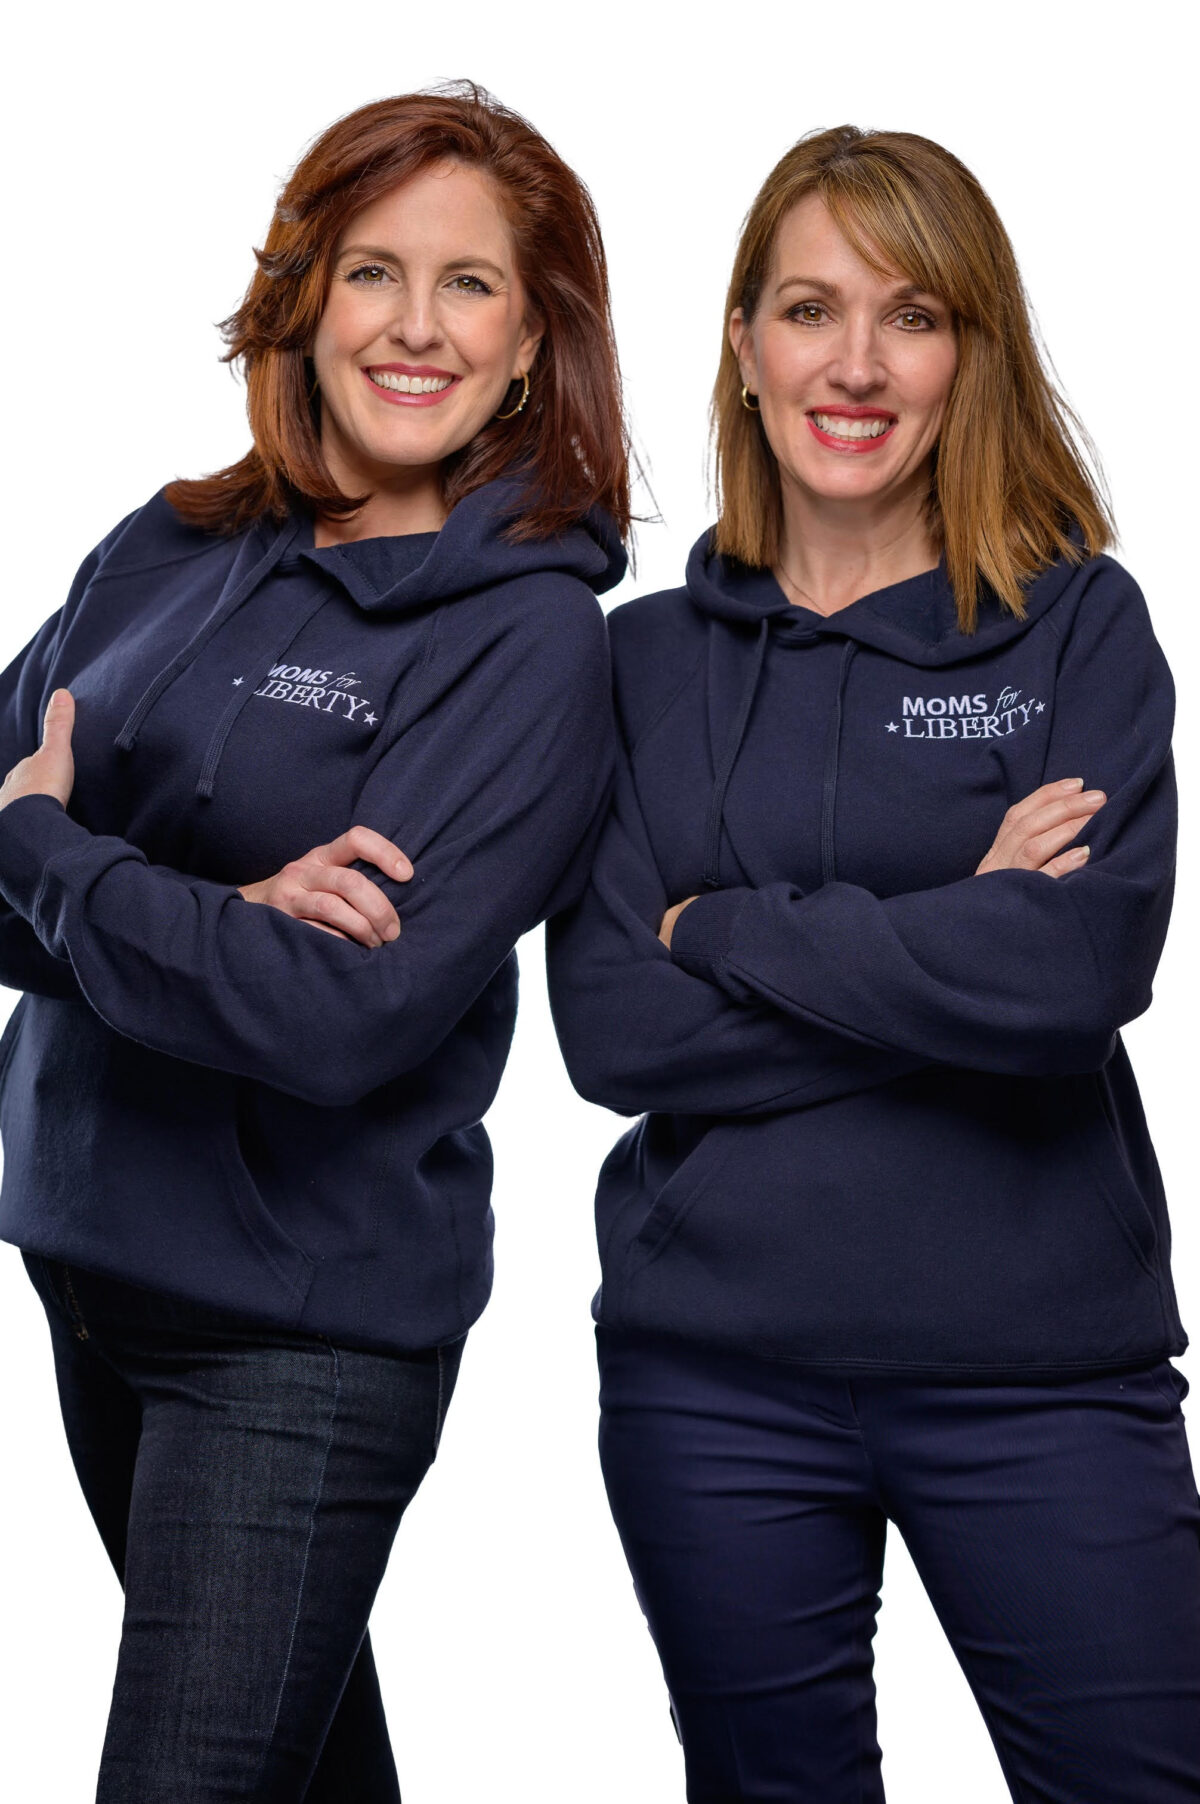 Tiffany Justice (left) and Tina Descovich (right), co-founders of Moms for Liberty. 